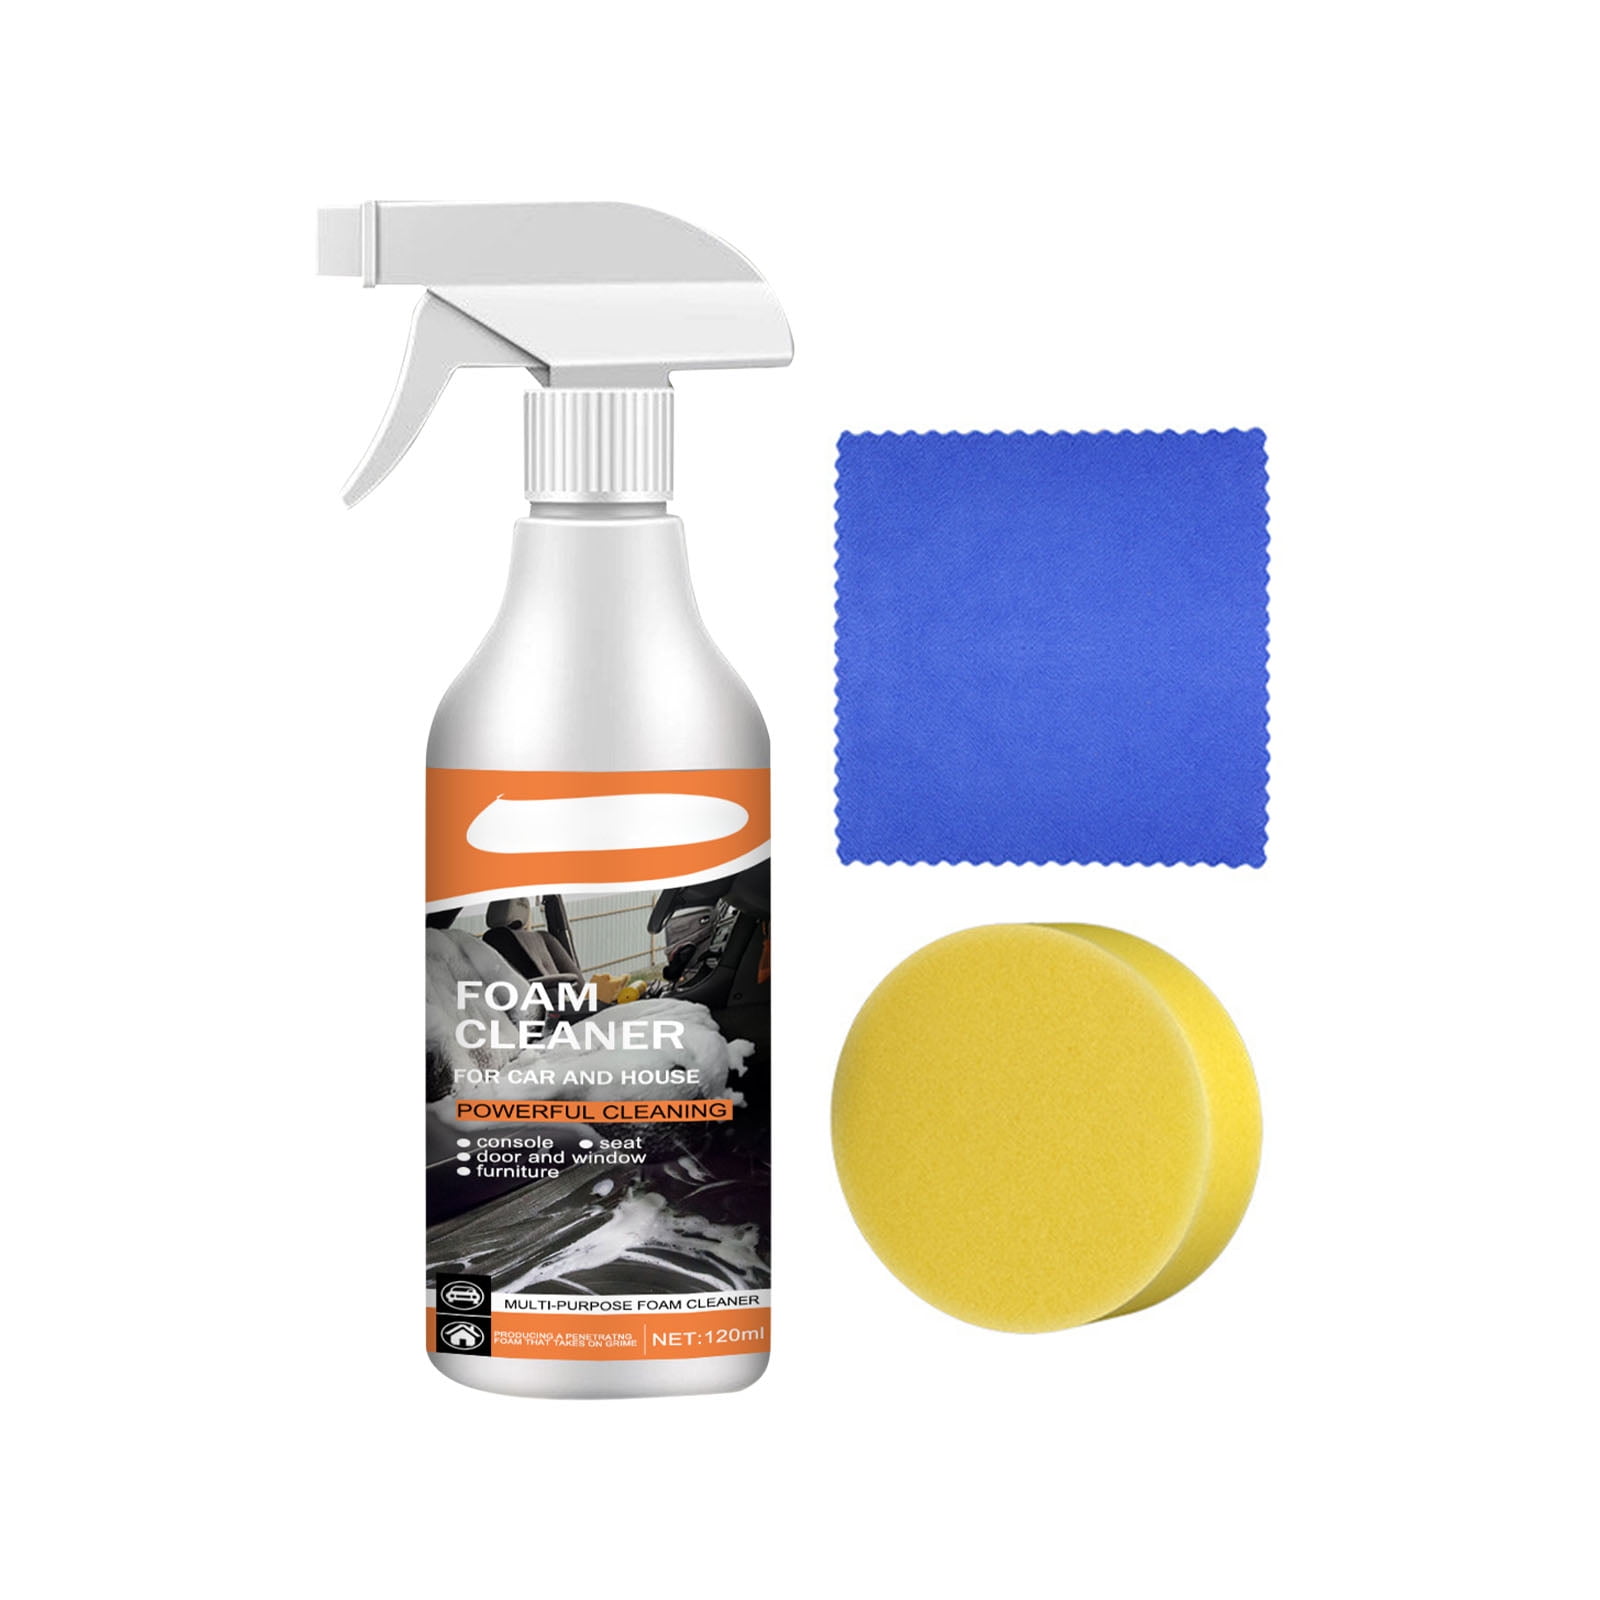 120ml Automotive Coating Interior Cleaner Car Cleaning Products